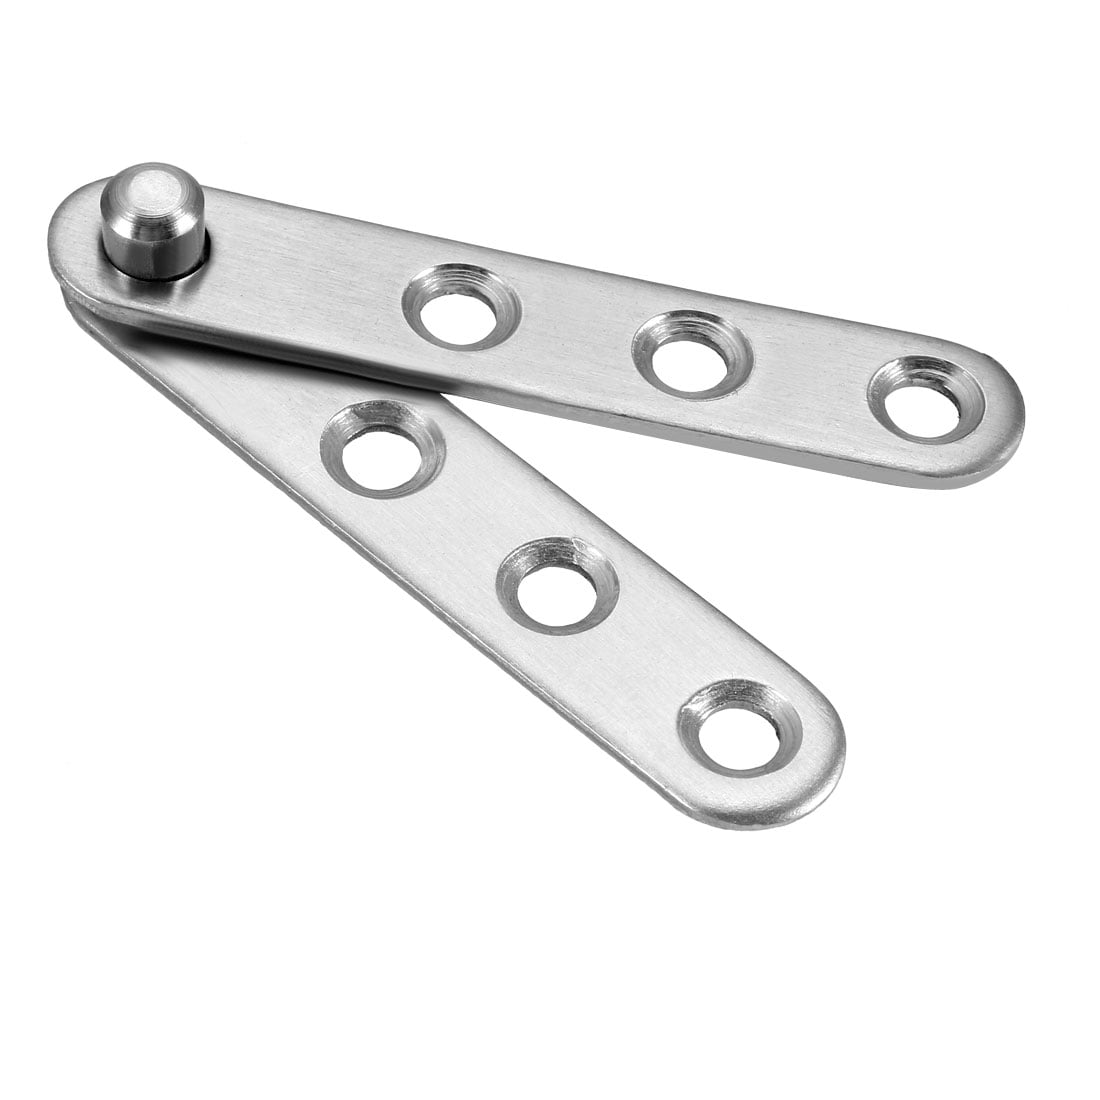 Uxcell Door Pivot Hinge, 58mmx11mmx9mm Stainless Steel 360 Degree Rotating 10pcs